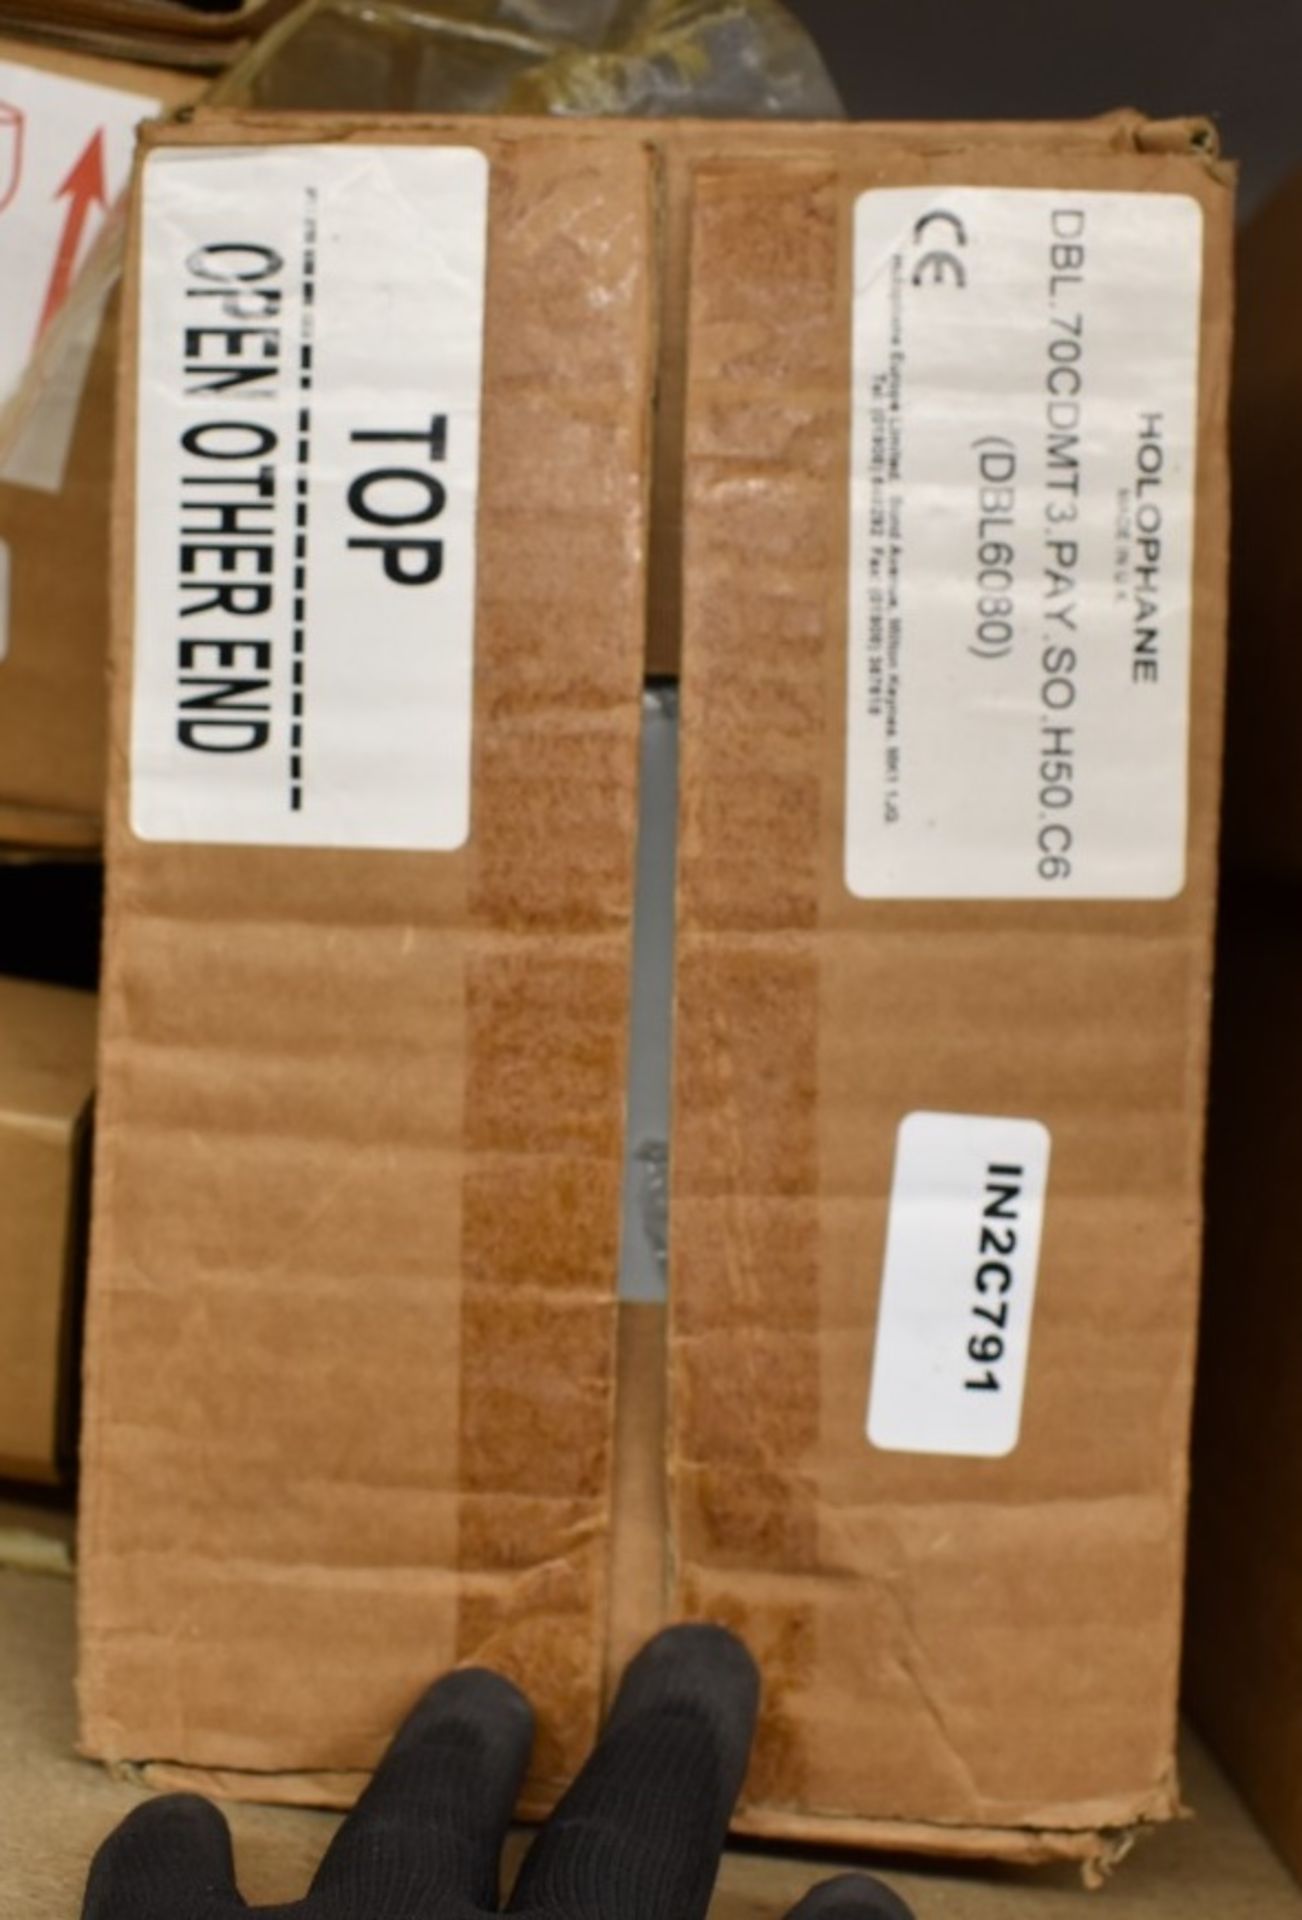 1 x Holophame DBL6080 Industrial Light Fitting - New Boxed Stock - Made in the UK - Image 2 of 5